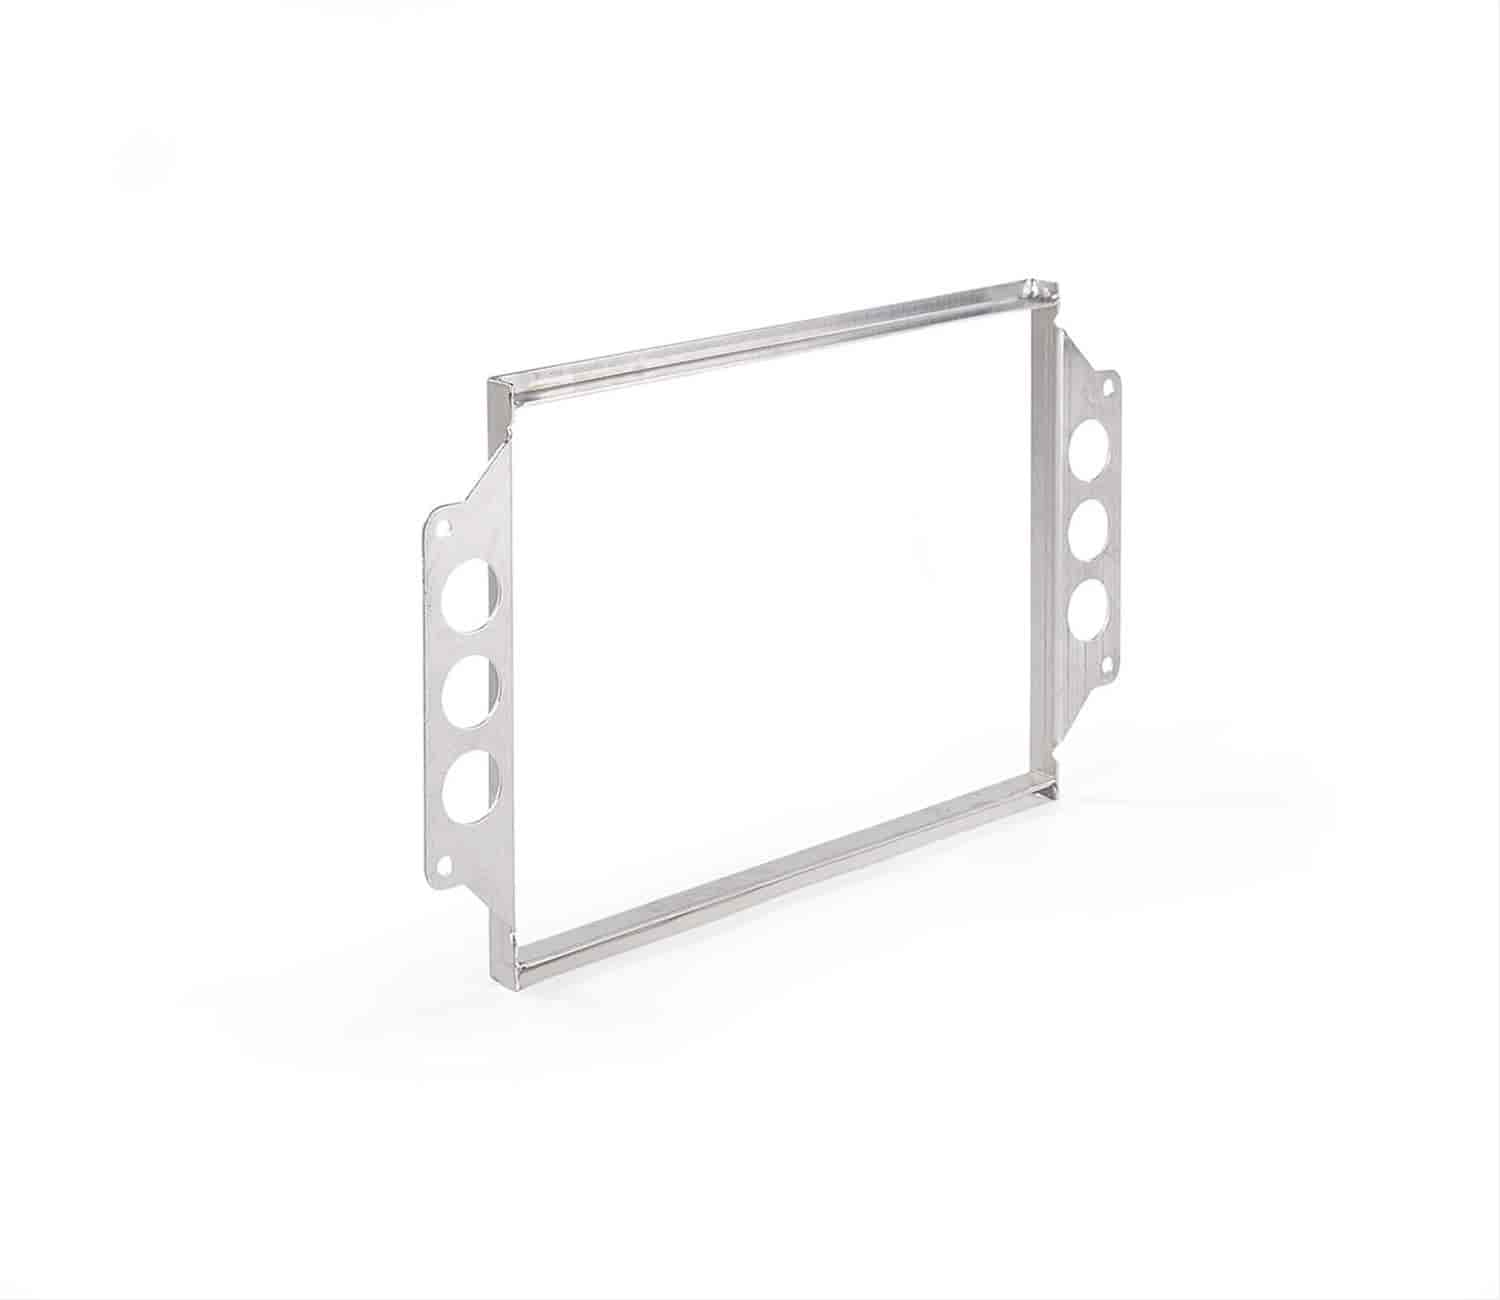 Aluminum Fan Mounting Bracket For Scirocco-Style Radiator